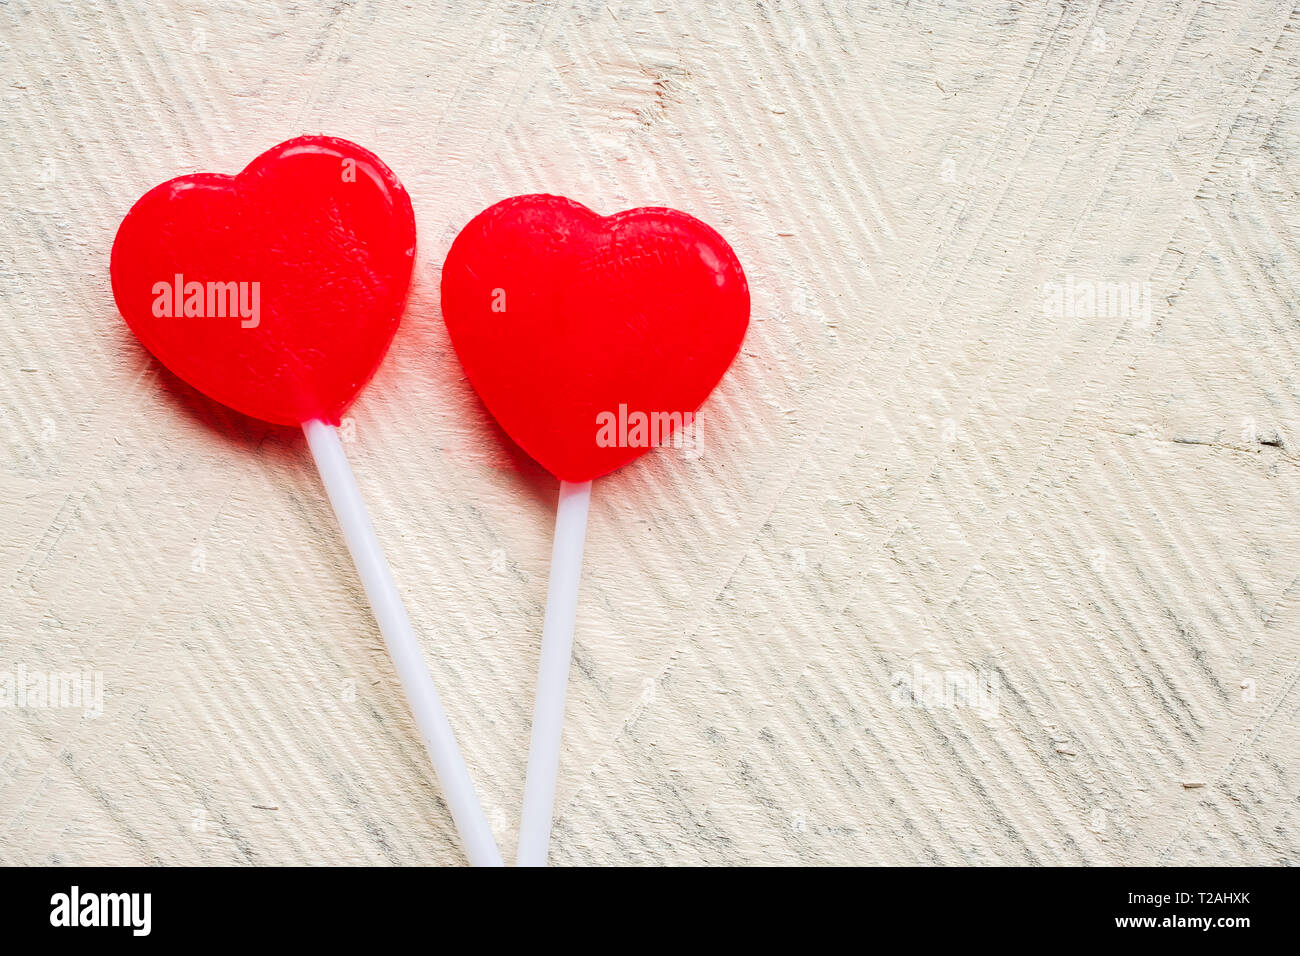 Red heart shaped lollipops Stock Photo